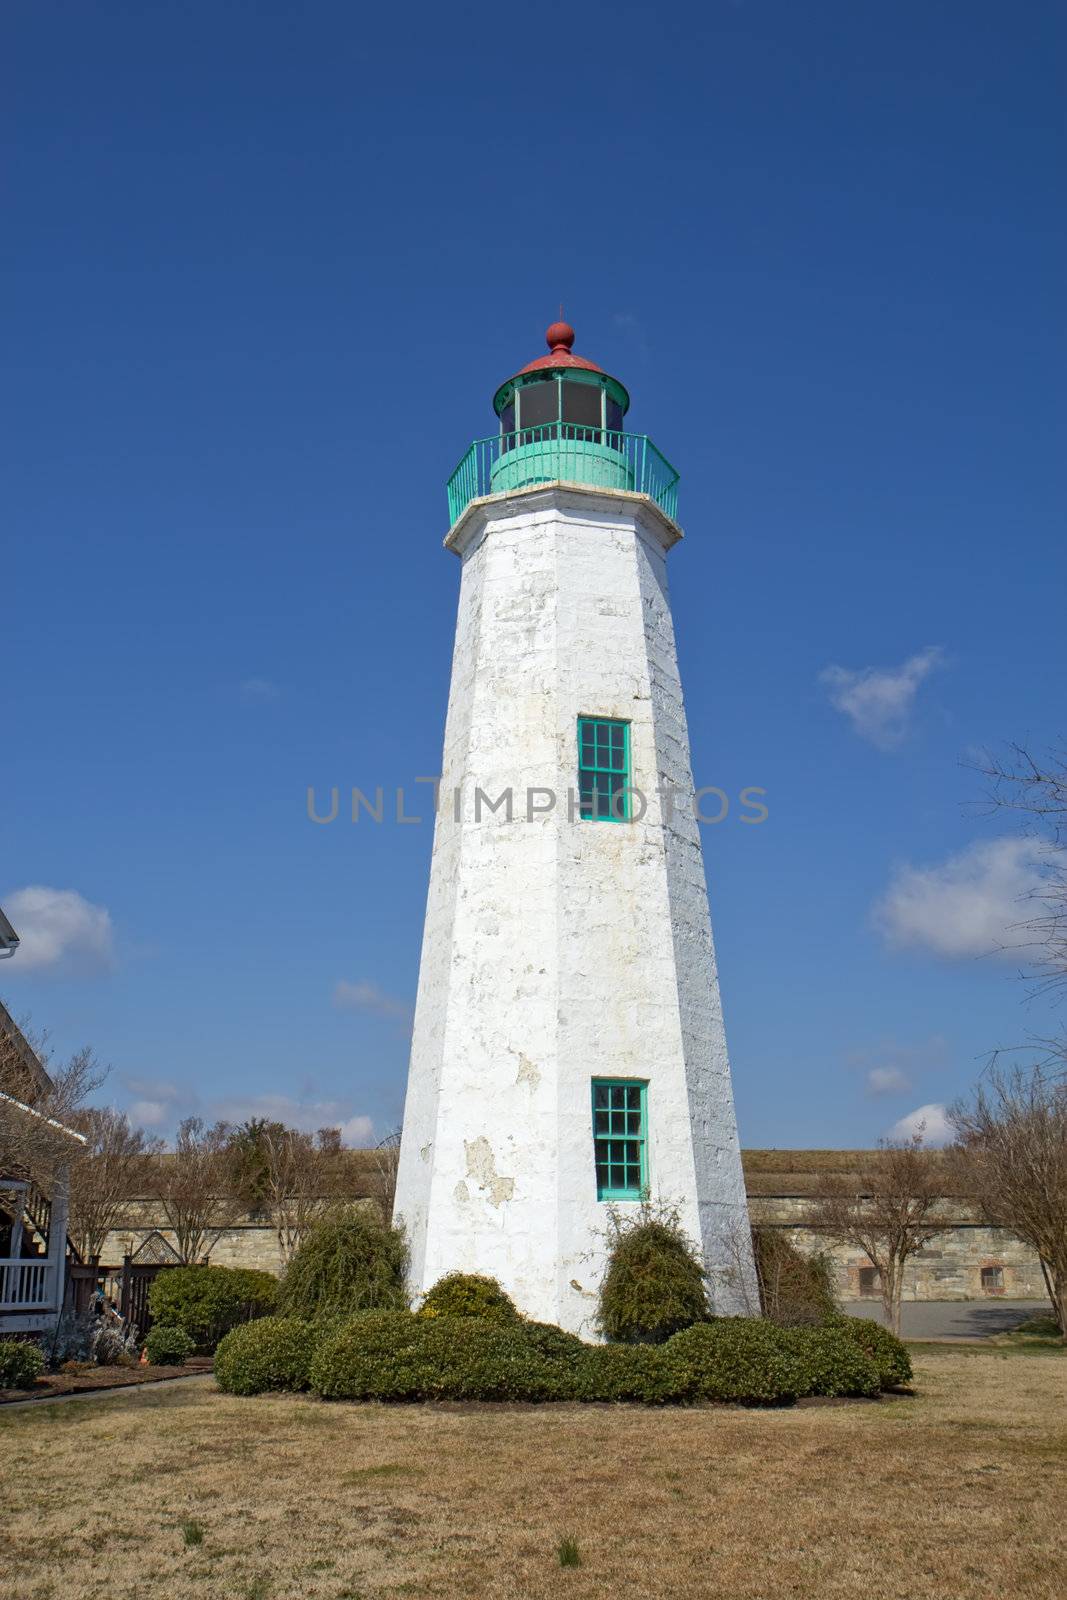 The Old Point Comfort lighthouse, a part of the new Fort Monroe National Monument, in winter against a bright blue sky